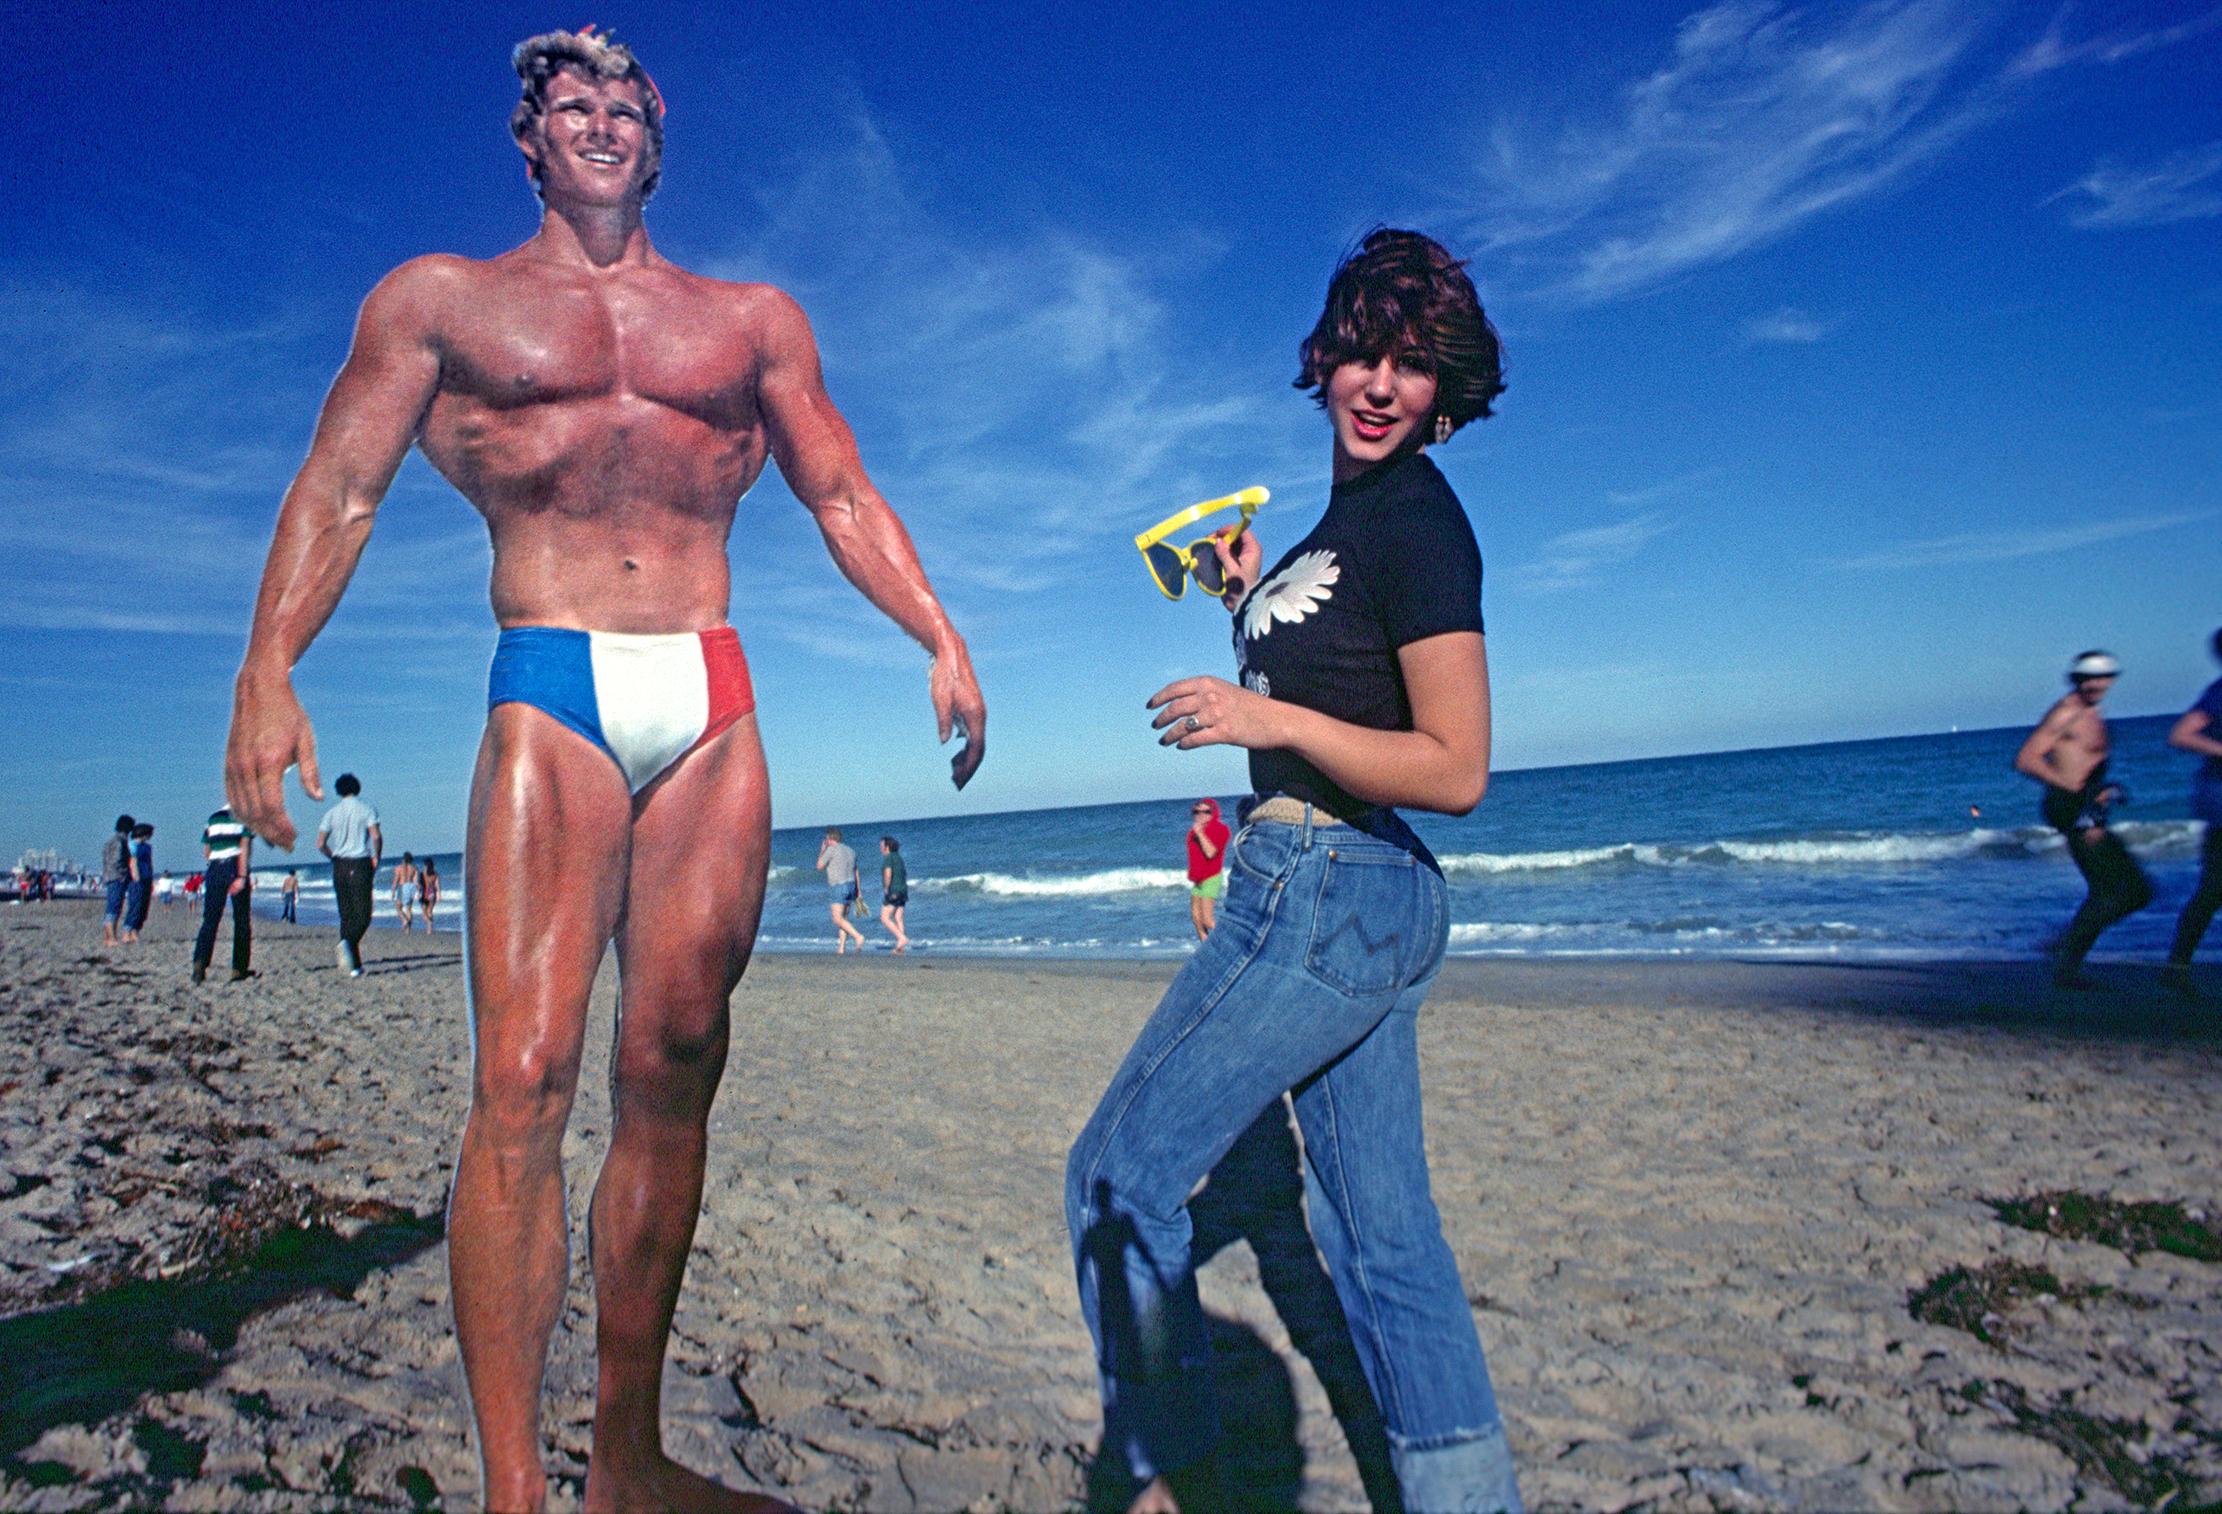 Robert Funk Figurative Photograph - Muscle Man and Female Admirer at the Beach - Staged Photography 